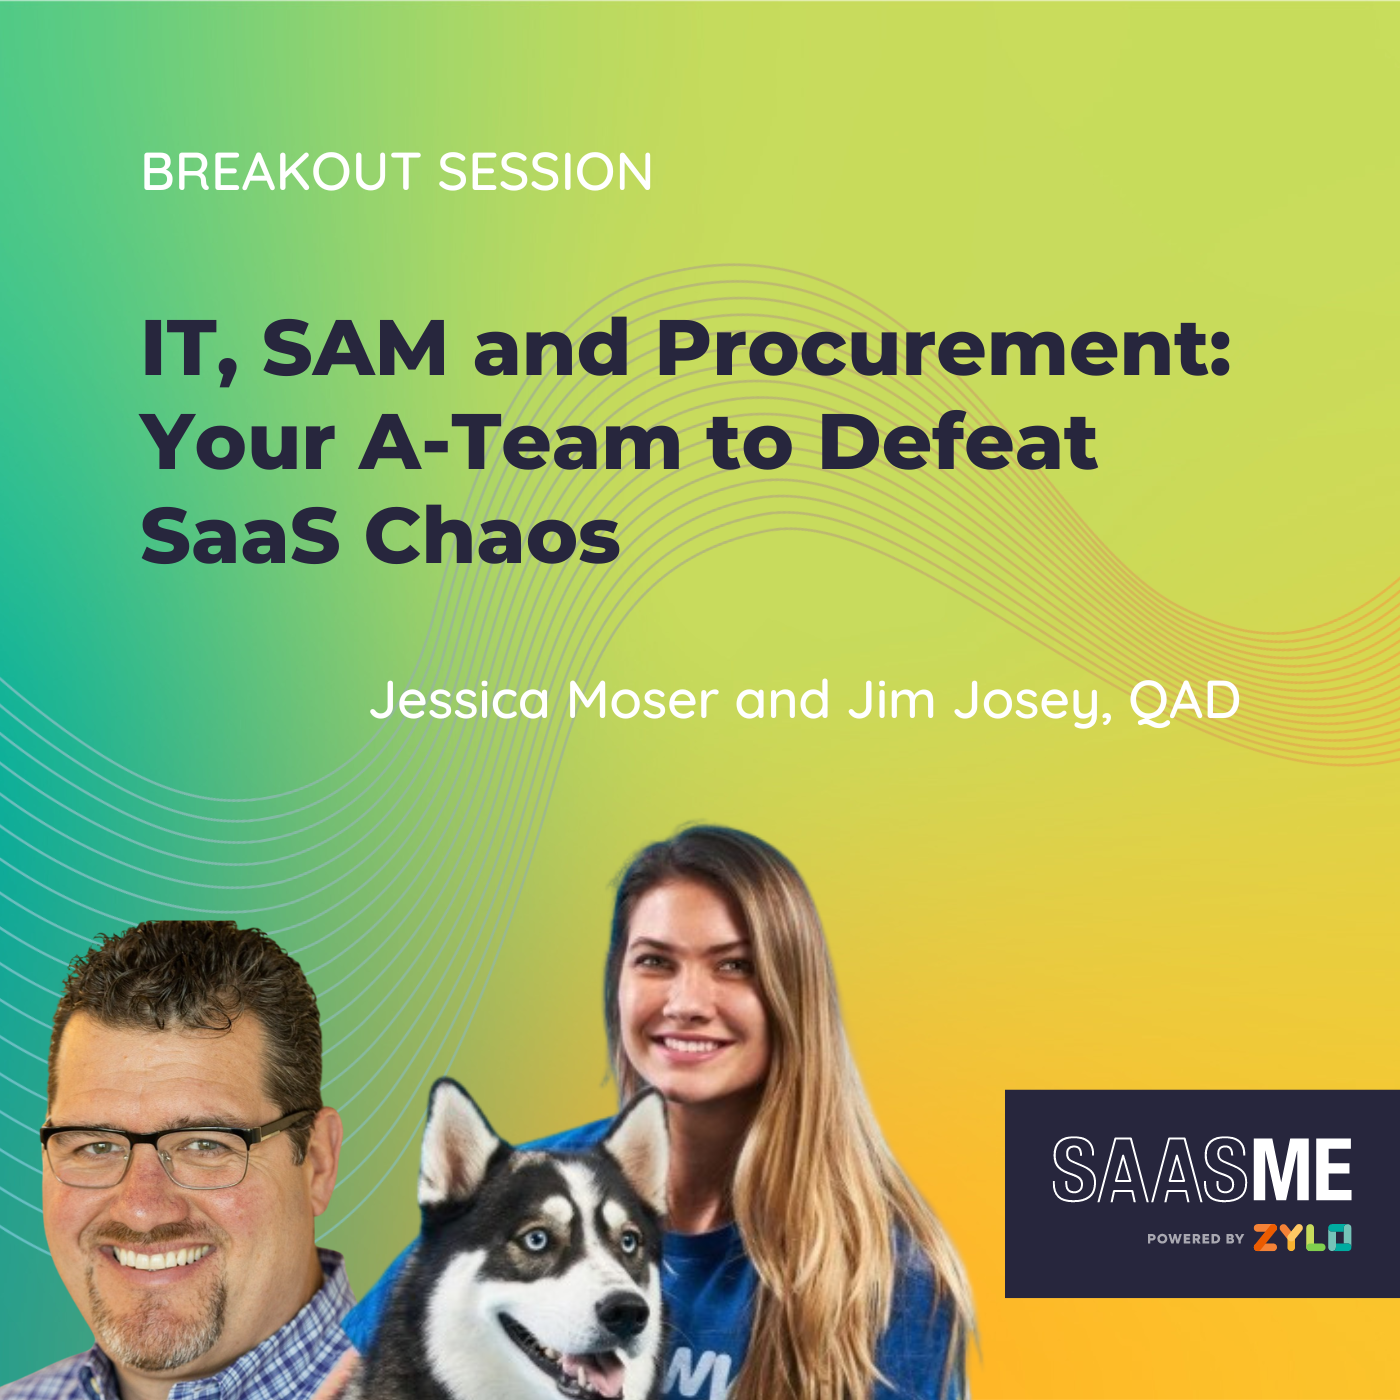 IT and Procurement: Your A-Team to Defeat SaaS Chaos